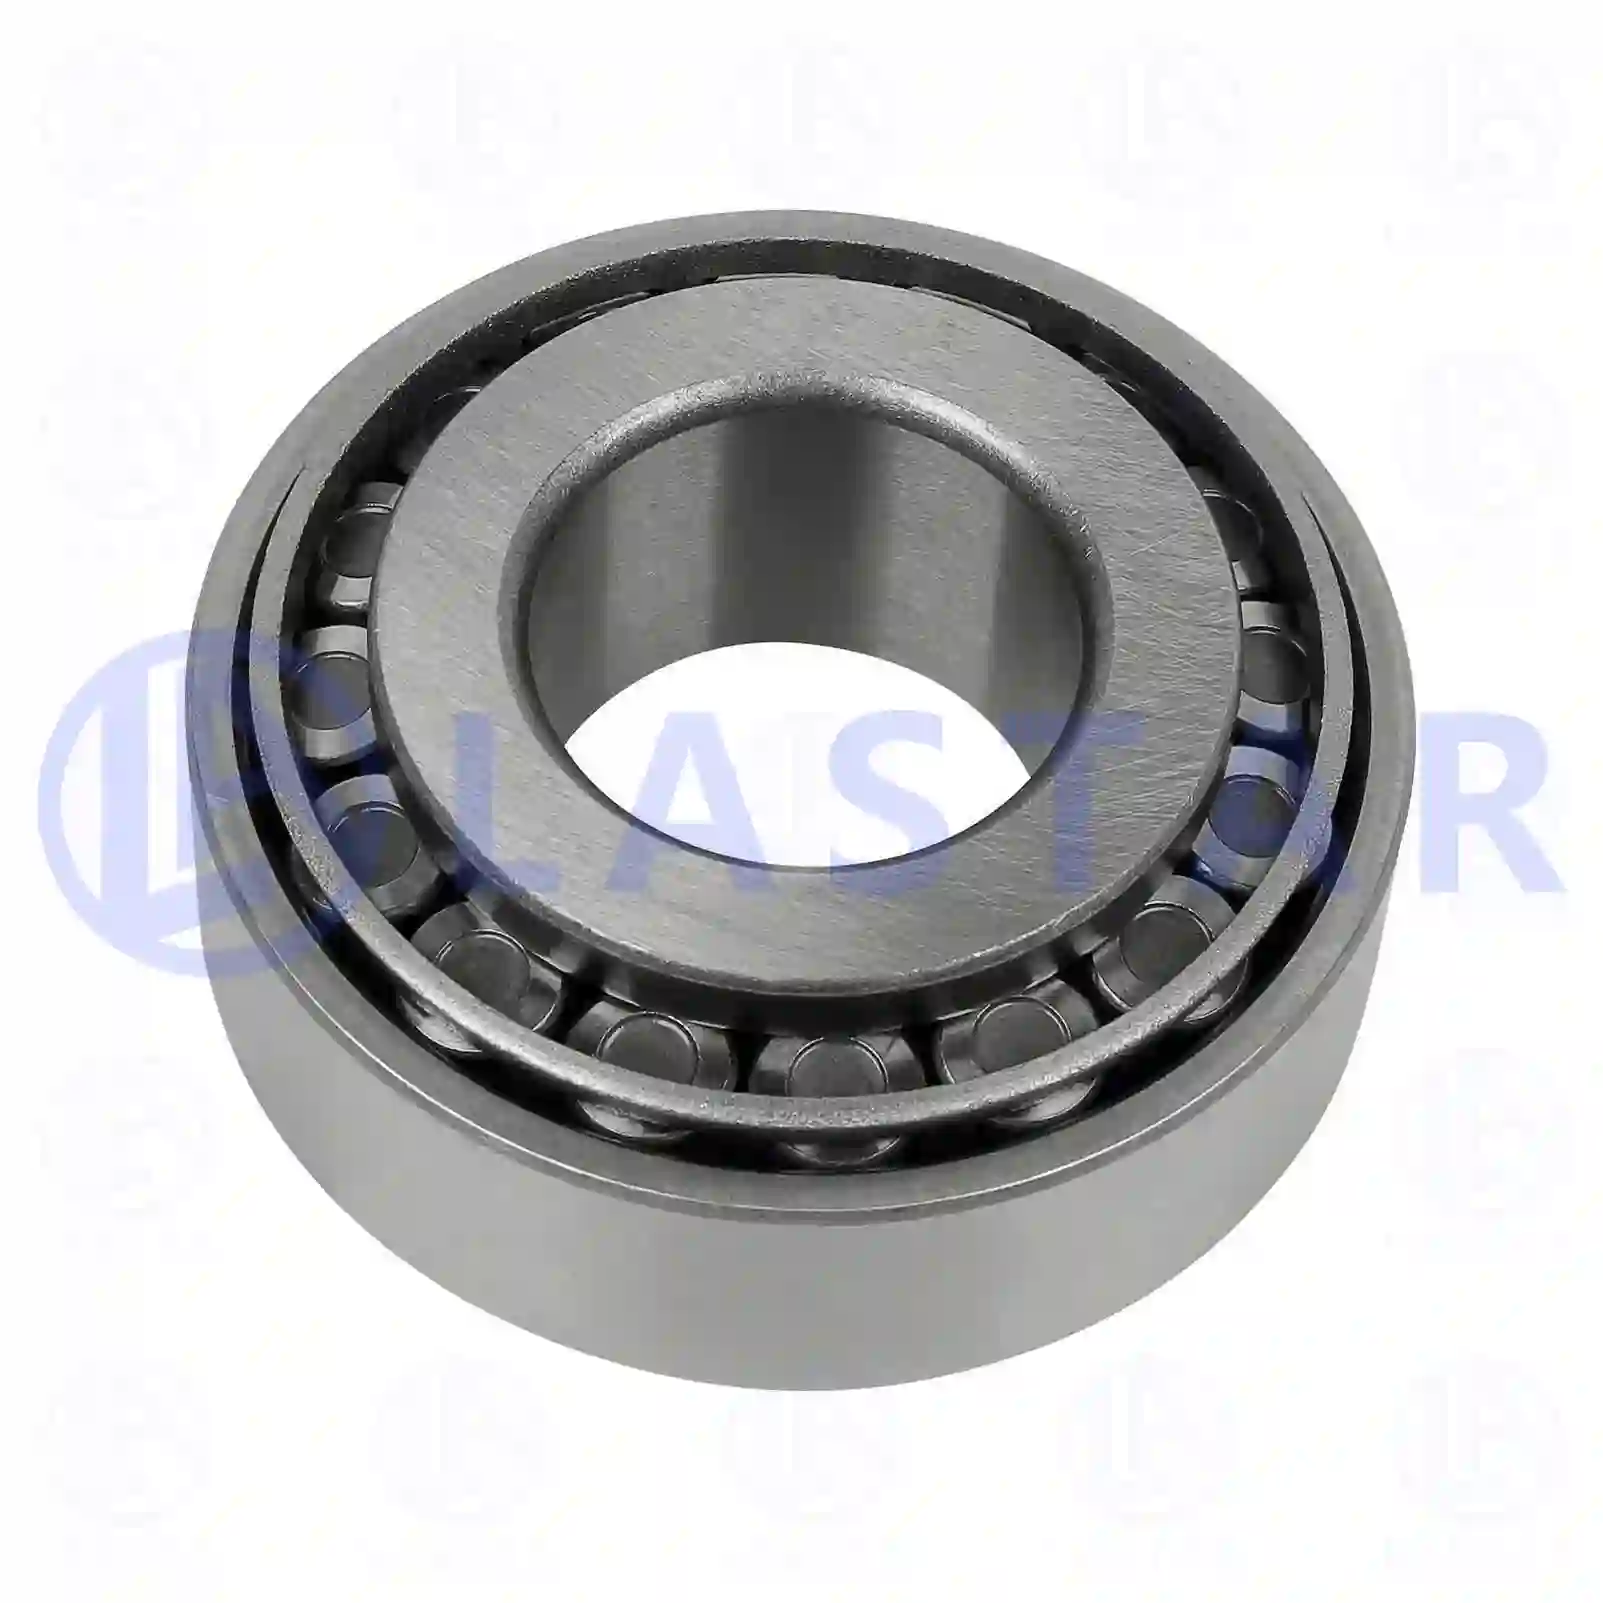 Tapered roller bearing, 77730283, 26800580, 01126887, 02049337, 07164503, 26800580, 06324990015, 34934200000, 87523400600, A0857596100, 0029816305, 0029816405, 2576334031, 38120-76500, 14698, 181669, 1911816, 322747, 11074, 181668, 181669 ||  77730283 Lastar Spare Part | Truck Spare Parts, Auotomotive Spare Parts Tapered roller bearing, 77730283, 26800580, 01126887, 02049337, 07164503, 26800580, 06324990015, 34934200000, 87523400600, A0857596100, 0029816305, 0029816405, 2576334031, 38120-76500, 14698, 181669, 1911816, 322747, 11074, 181668, 181669 ||  77730283 Lastar Spare Part | Truck Spare Parts, Auotomotive Spare Parts